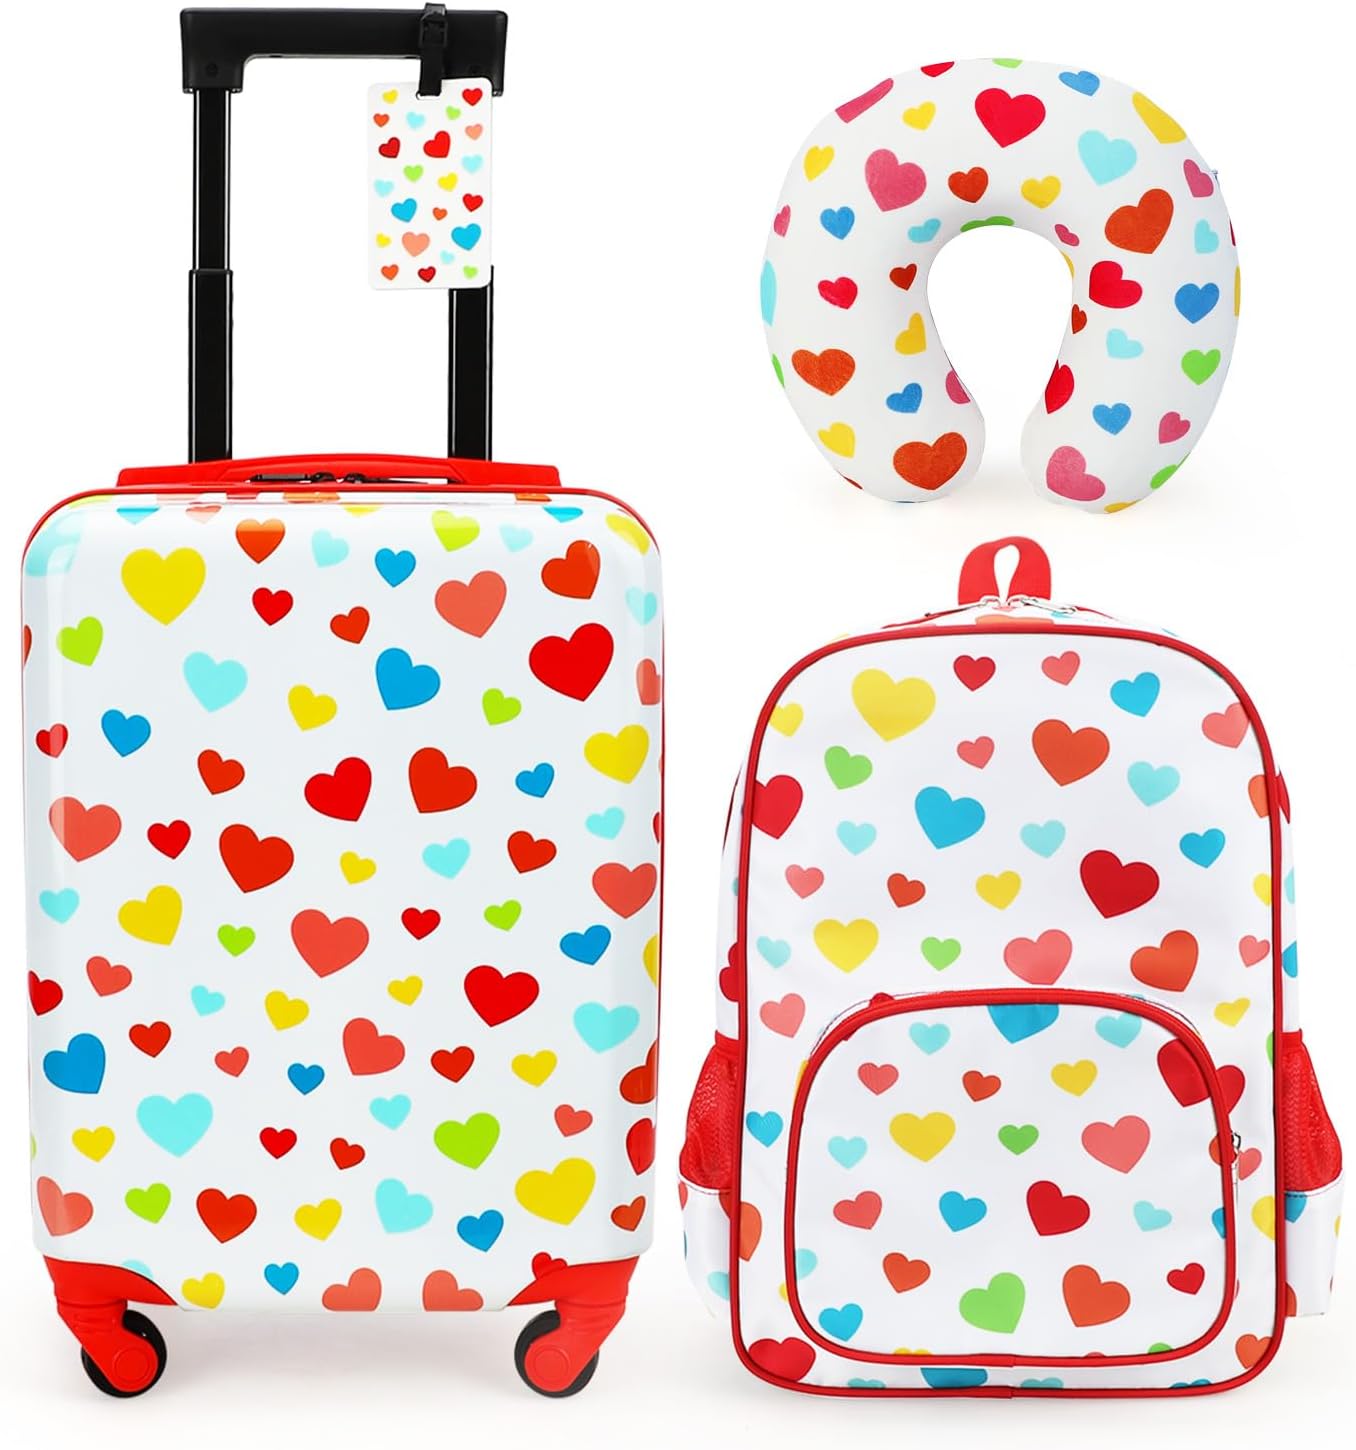 emissary Kids Luggage With Wheels For Girls, 3 Piece Luggage Set, Childrens Luggage For Girls With Wheels, Kids Suitcases With Wheels For Girls, Toddler Suitcase For Girls, Travel Luggage For Kids